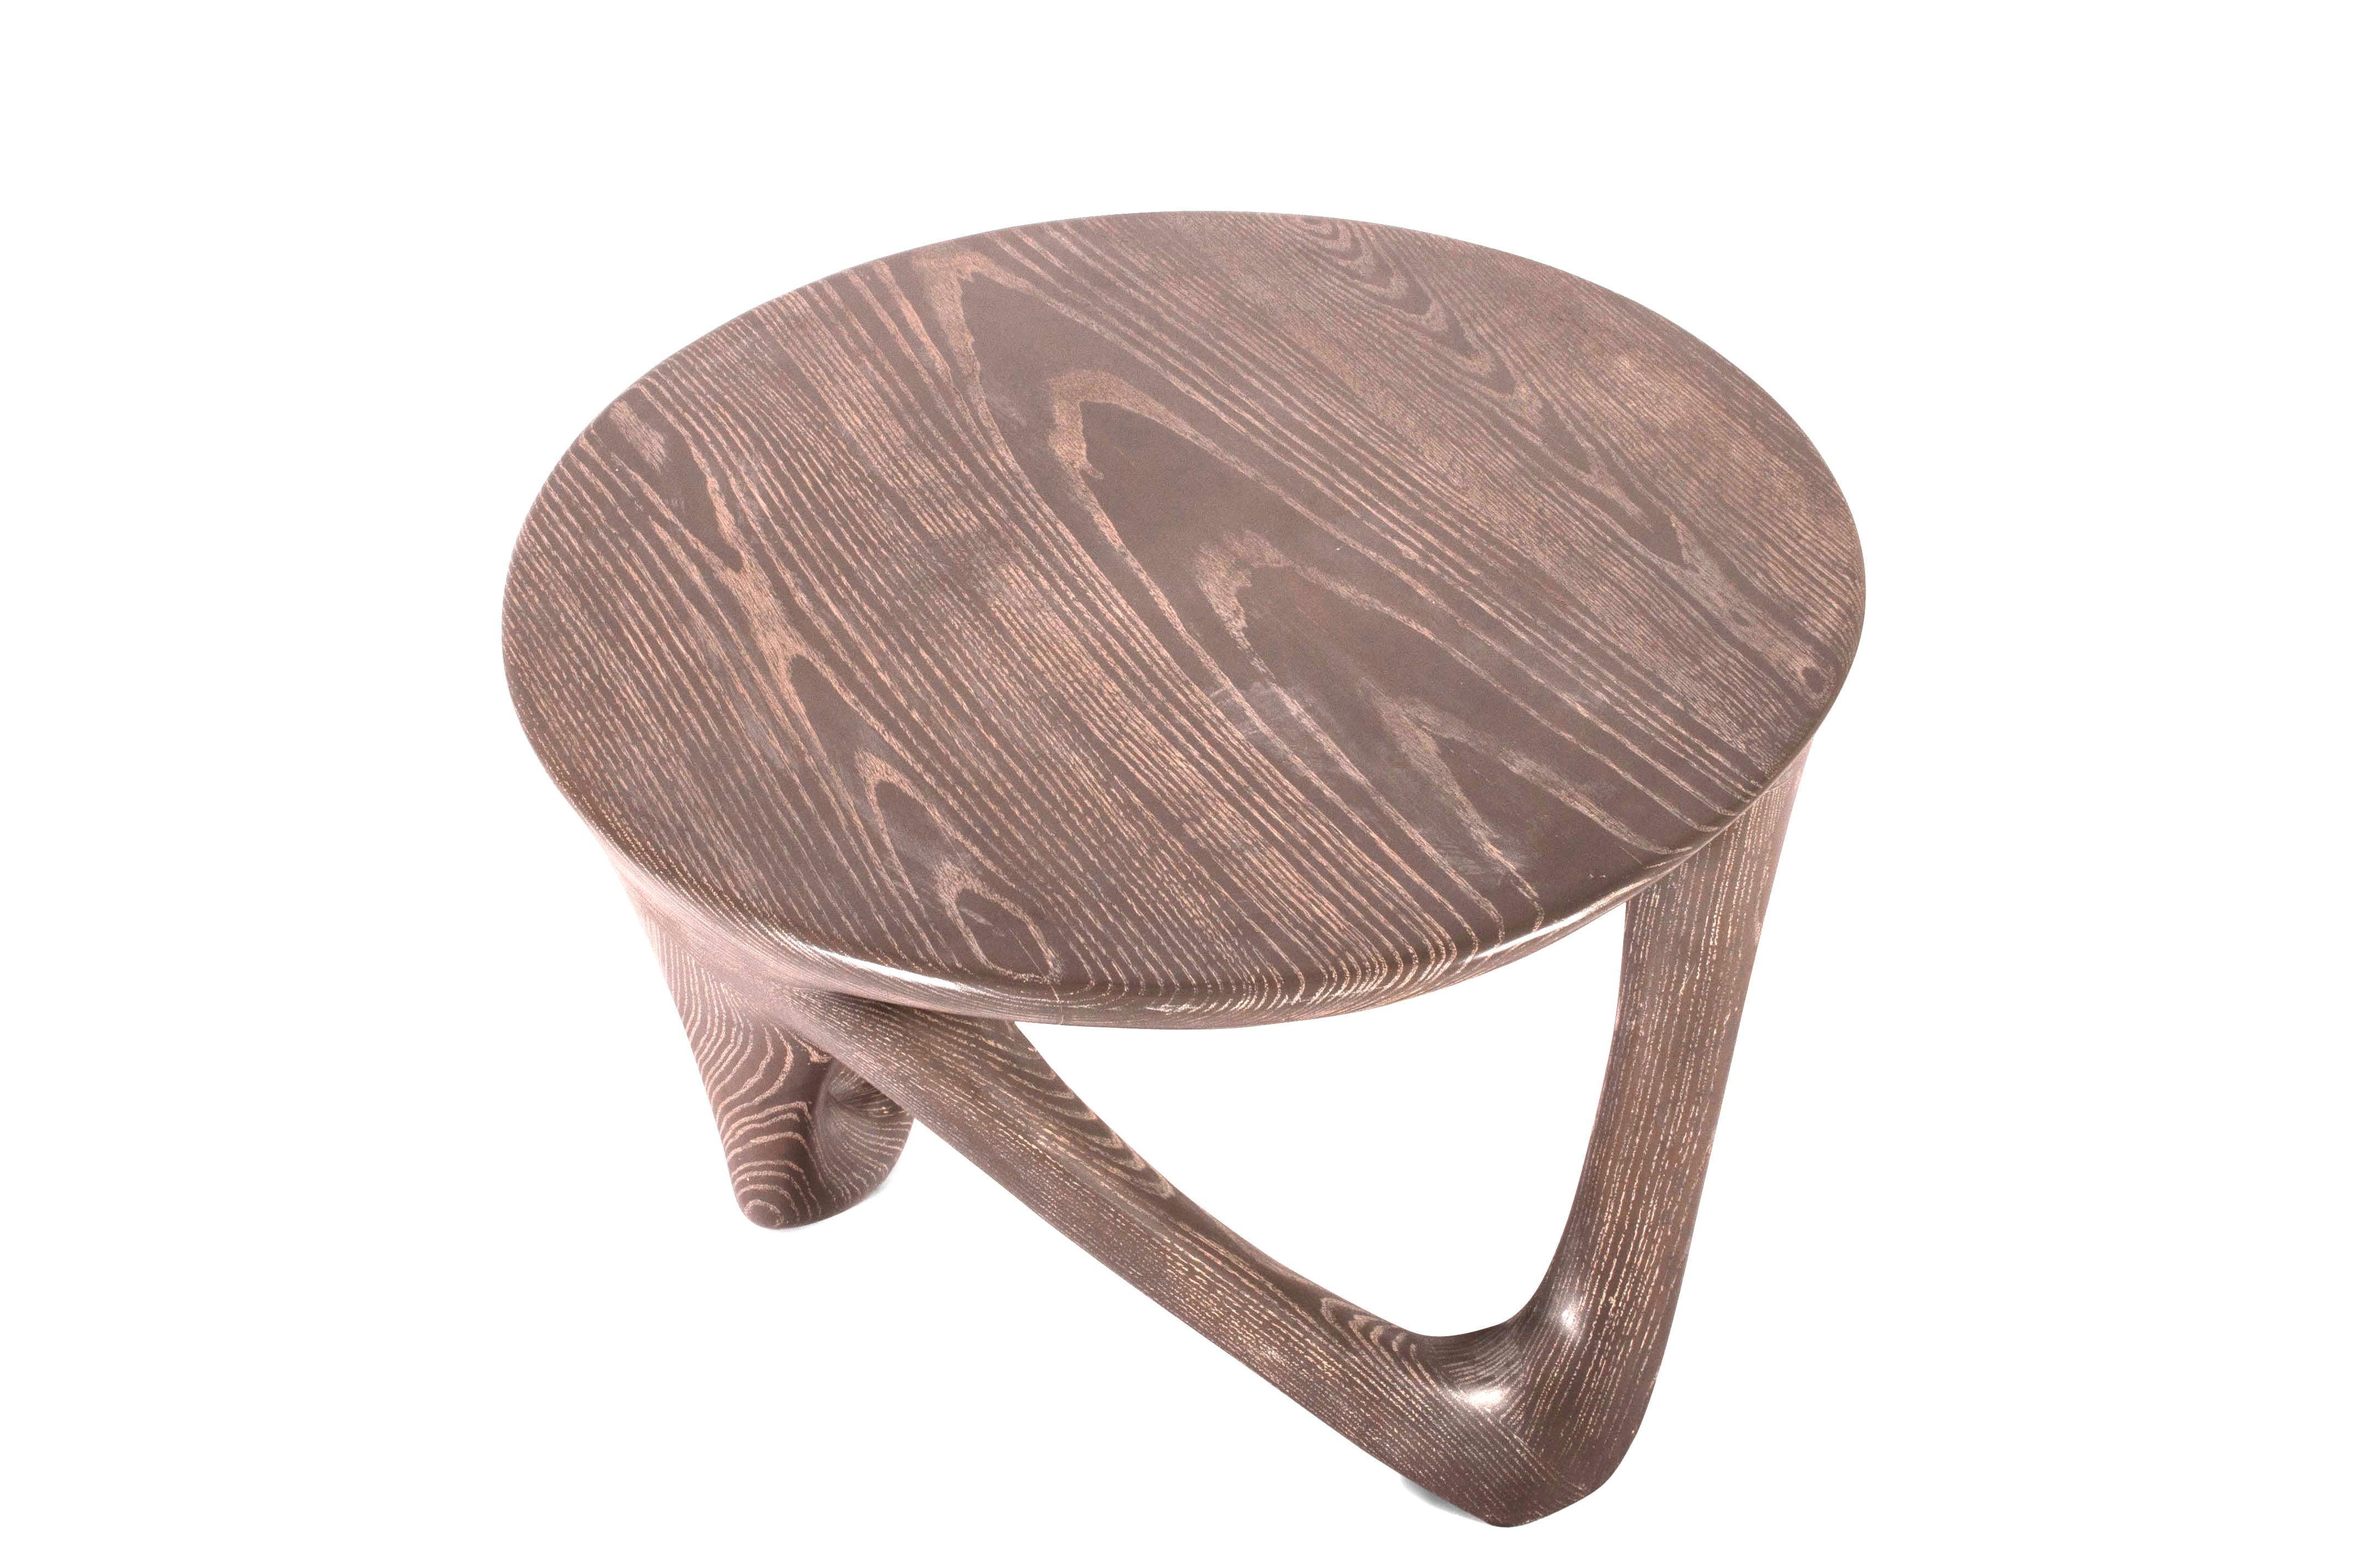 Amorph Ya Modern Side Table in Mesa Stain on Solid Wood In New Condition For Sale In Los Angeles, CA